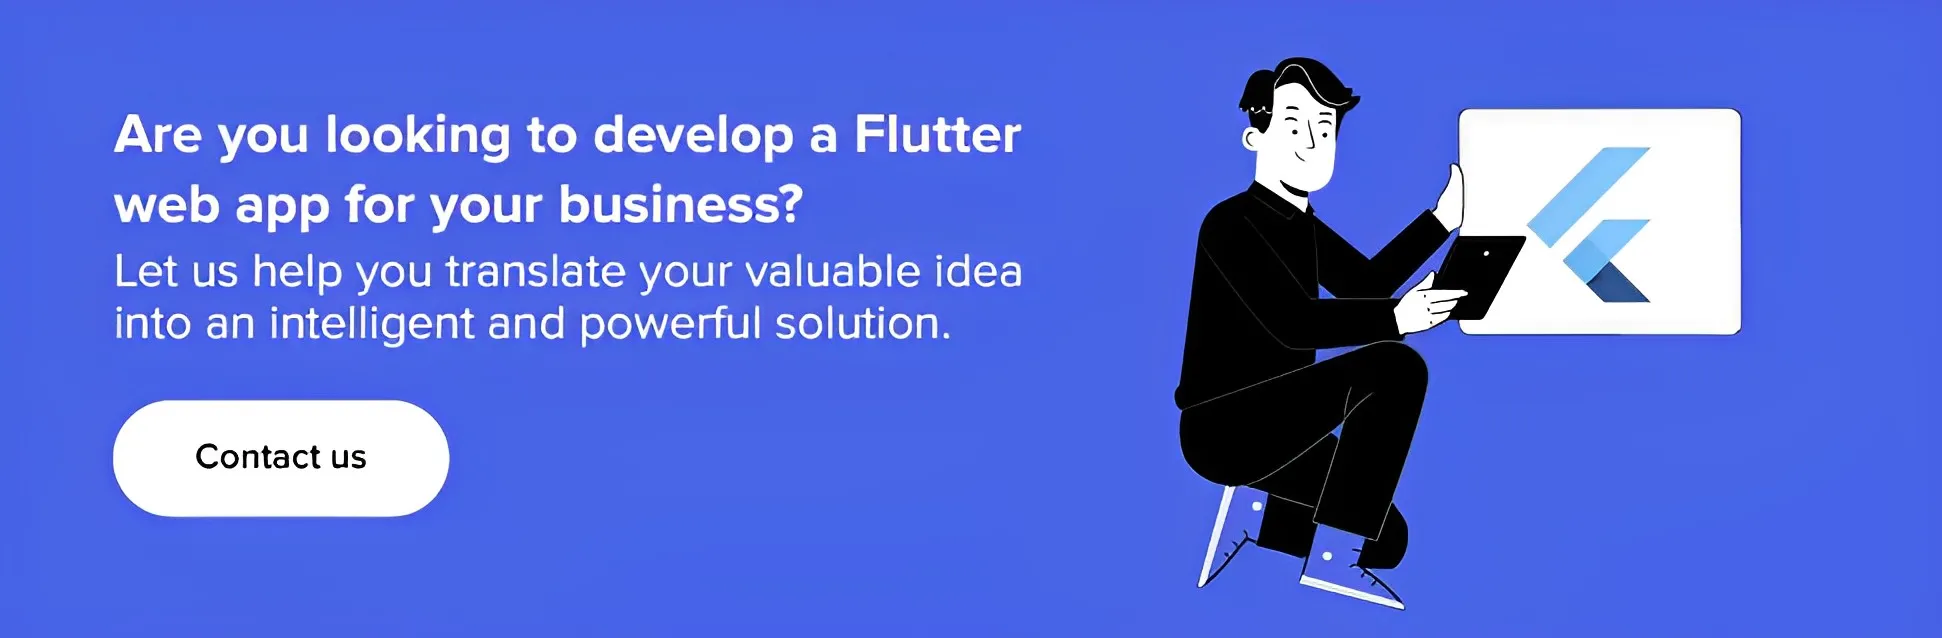 flutter-for-the-web-contact